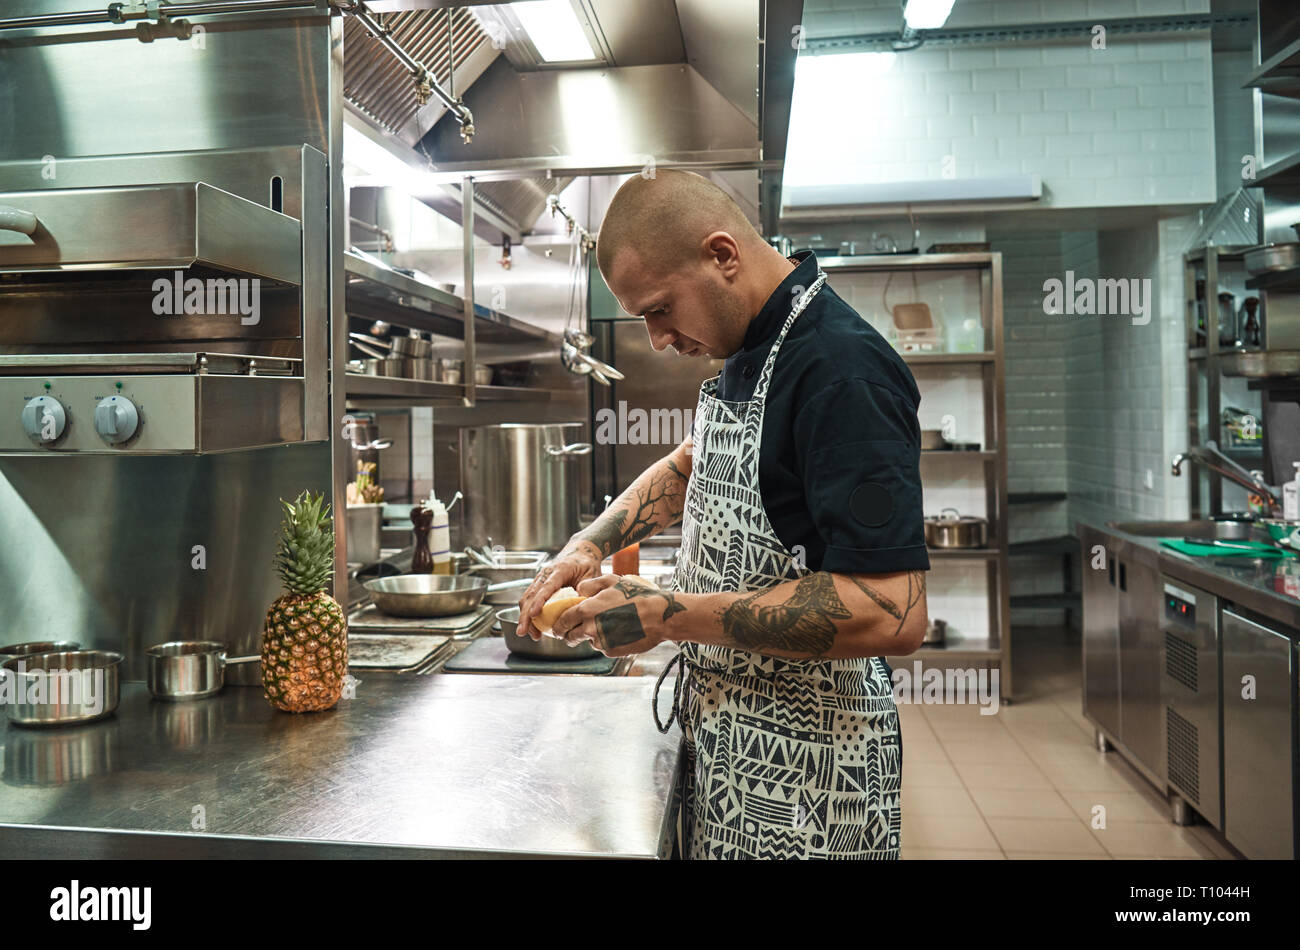 Fresh fruits. Side view of young chef with several tattoos on his arms peeling a grapefruit while standing in a professional kitchen. Making a juice Stock Photo